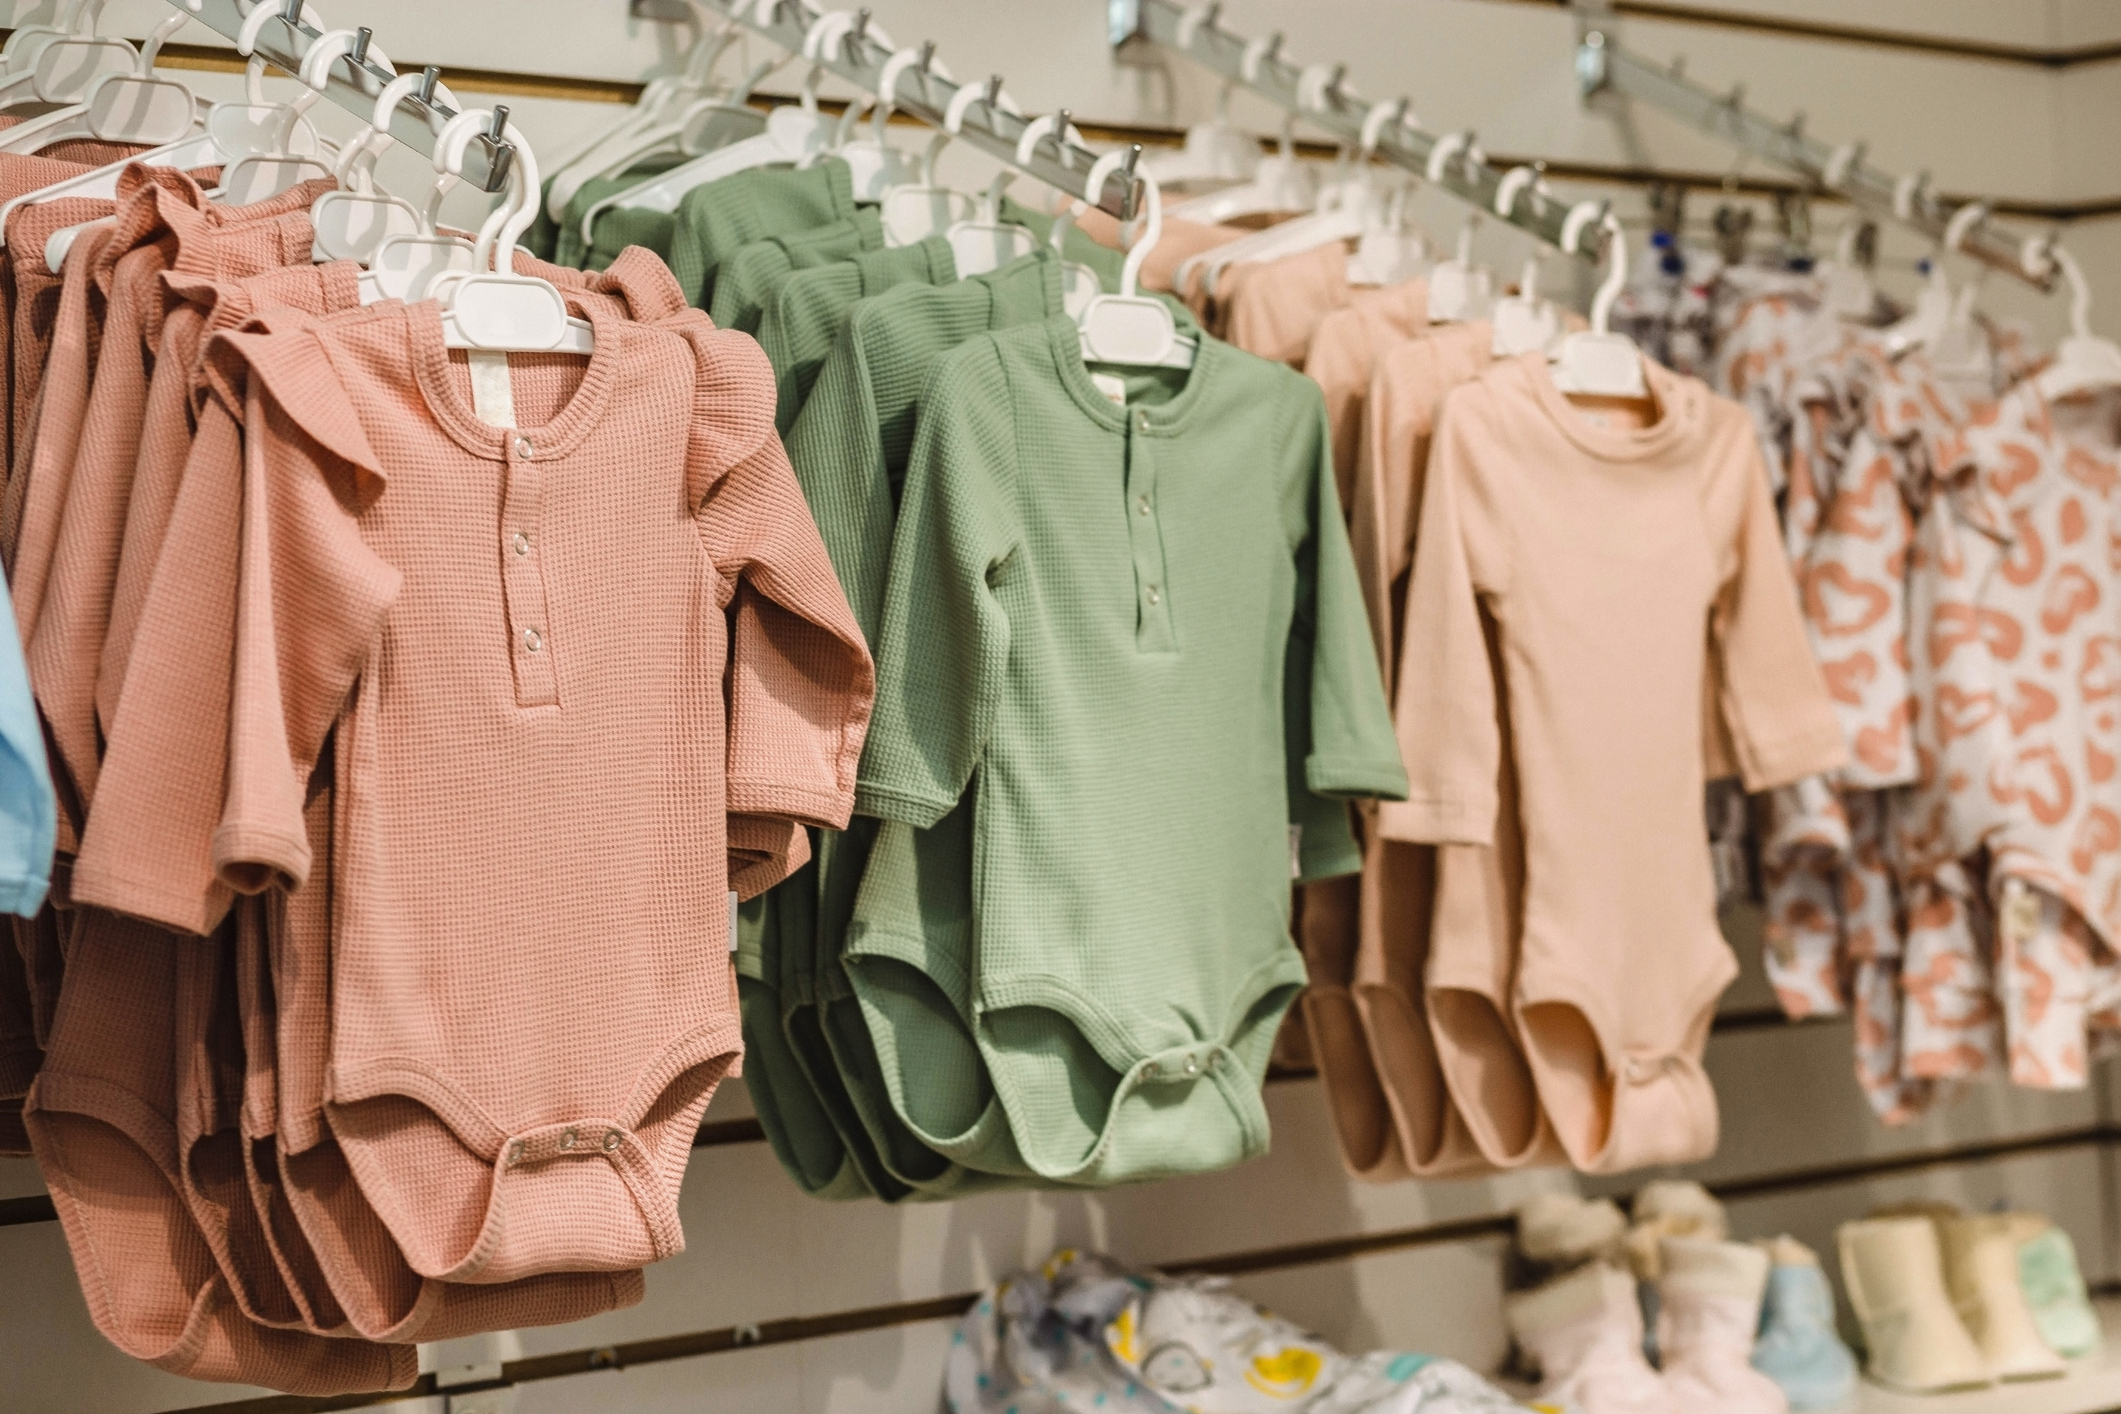 Baby clothing on hangars in store